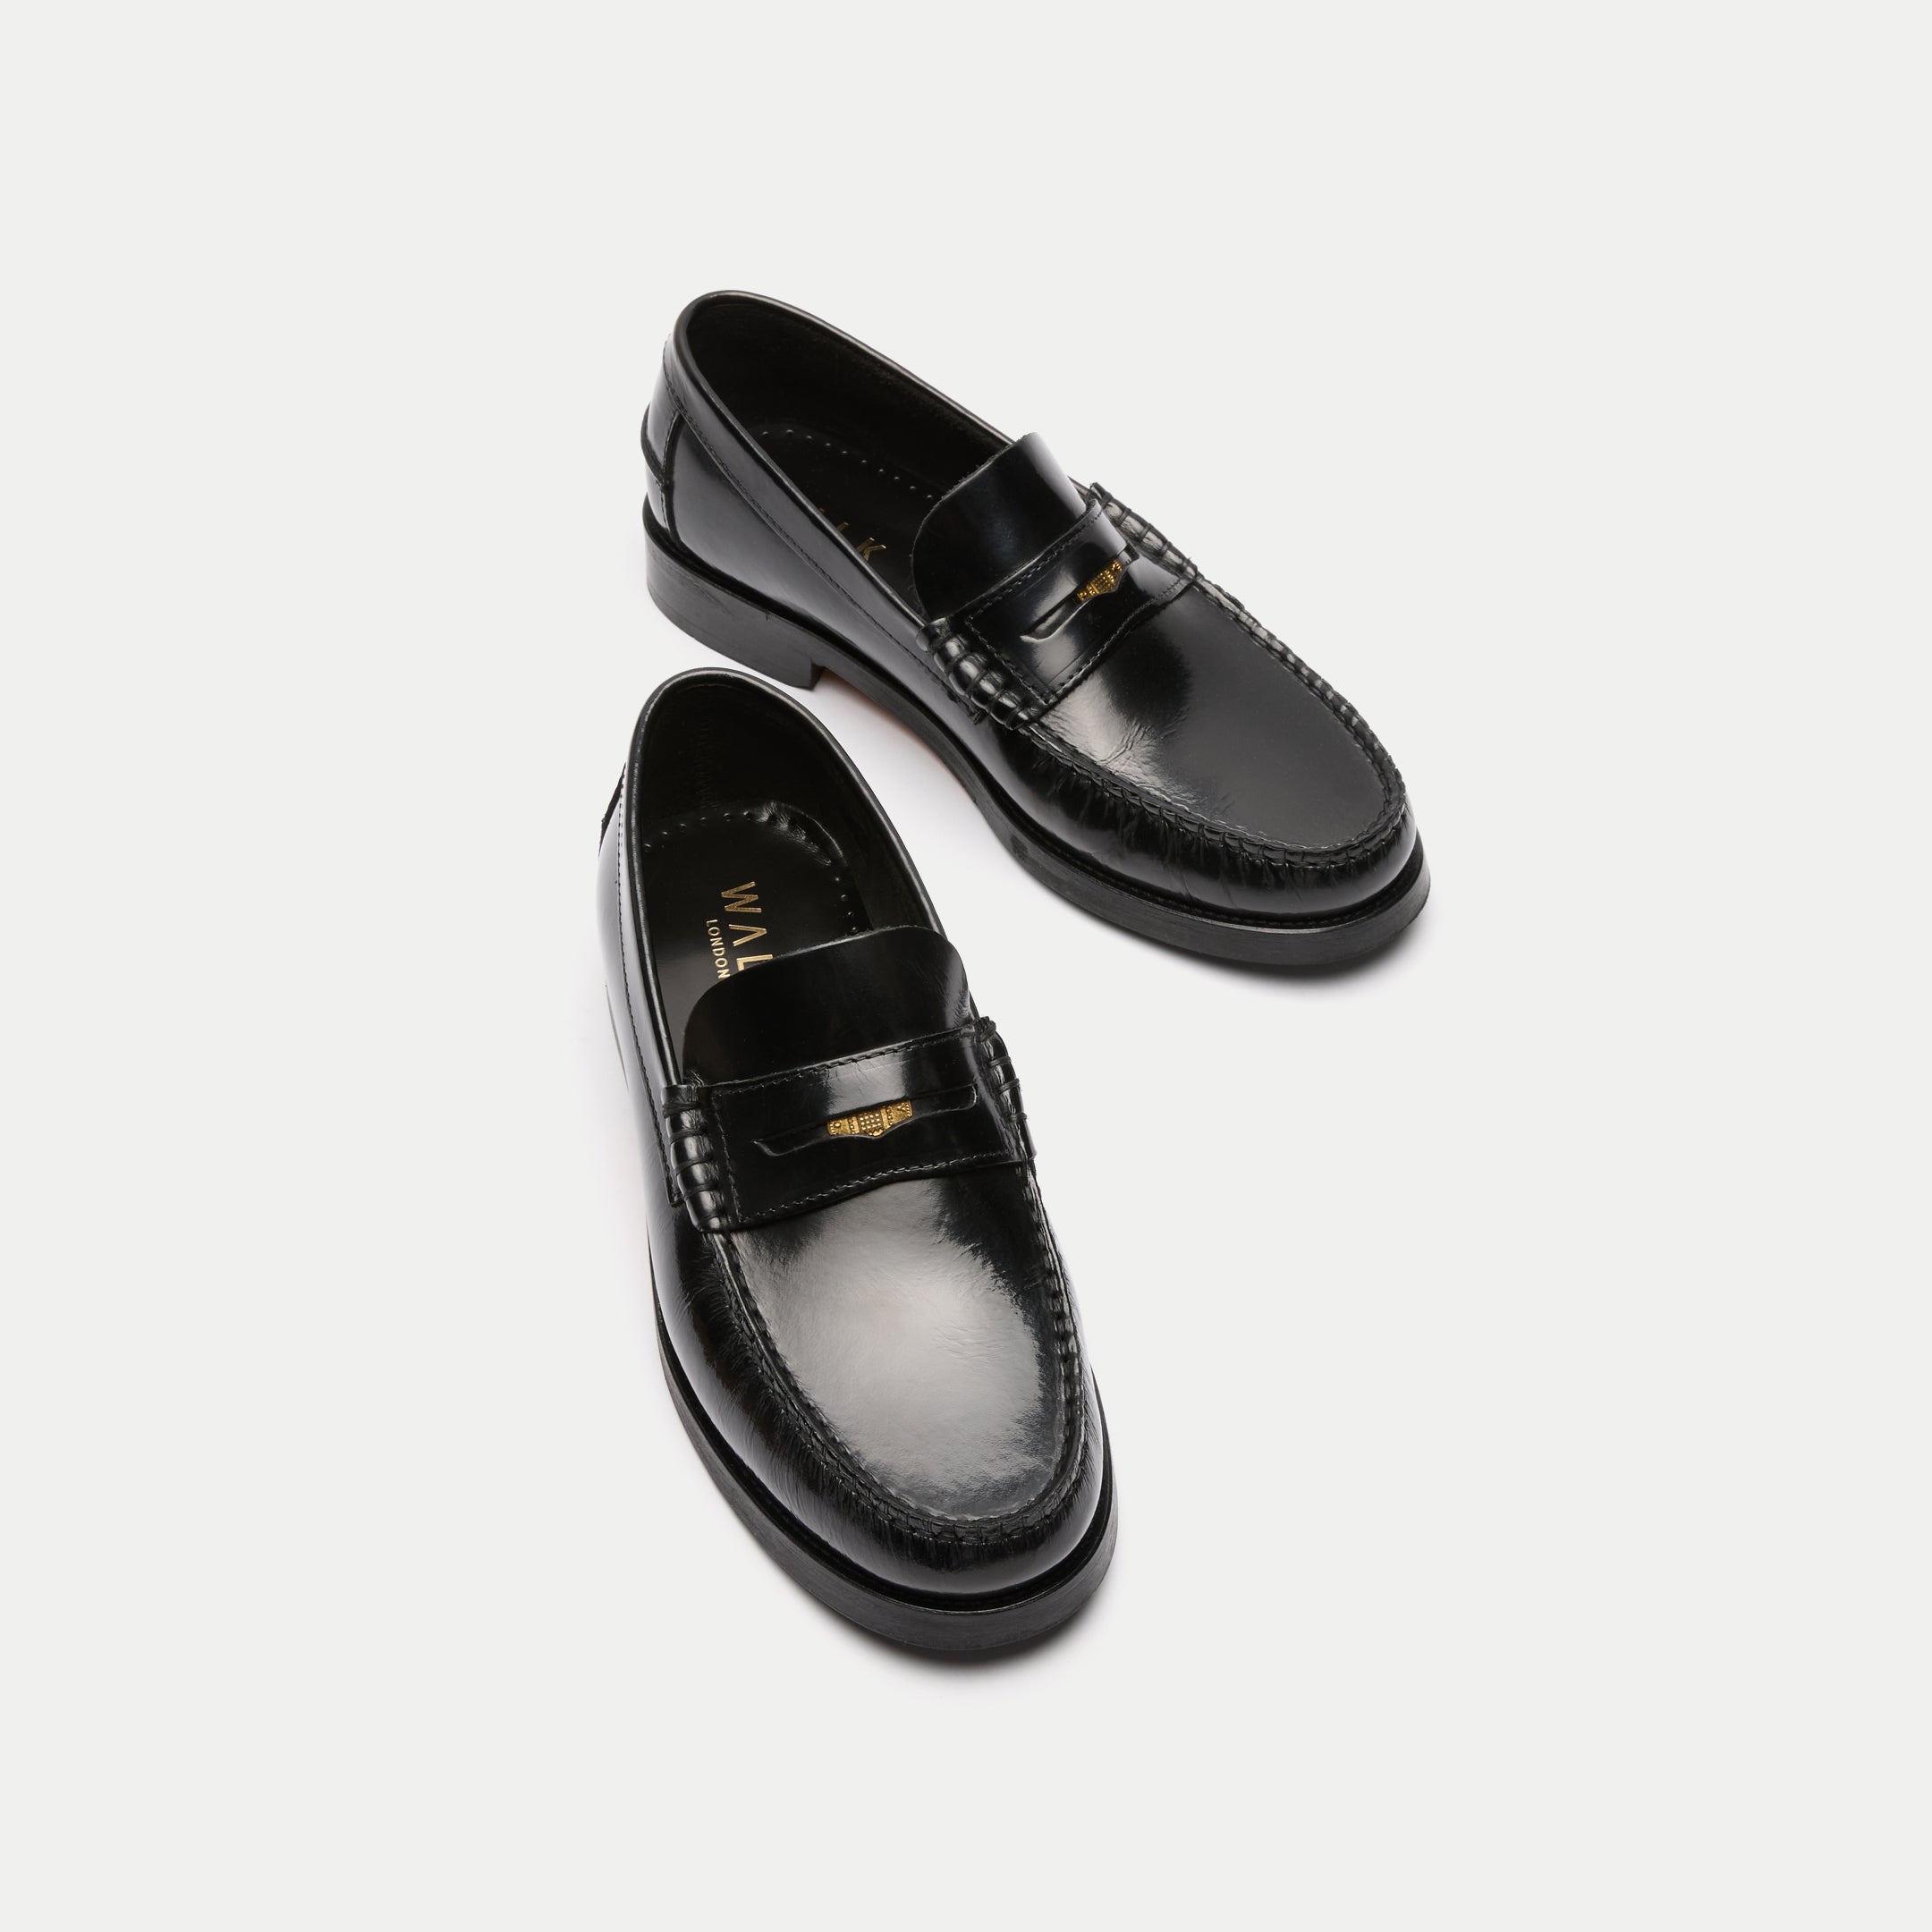 Walk London Mens Dalston Penny Loafer in High Shine Black Leather